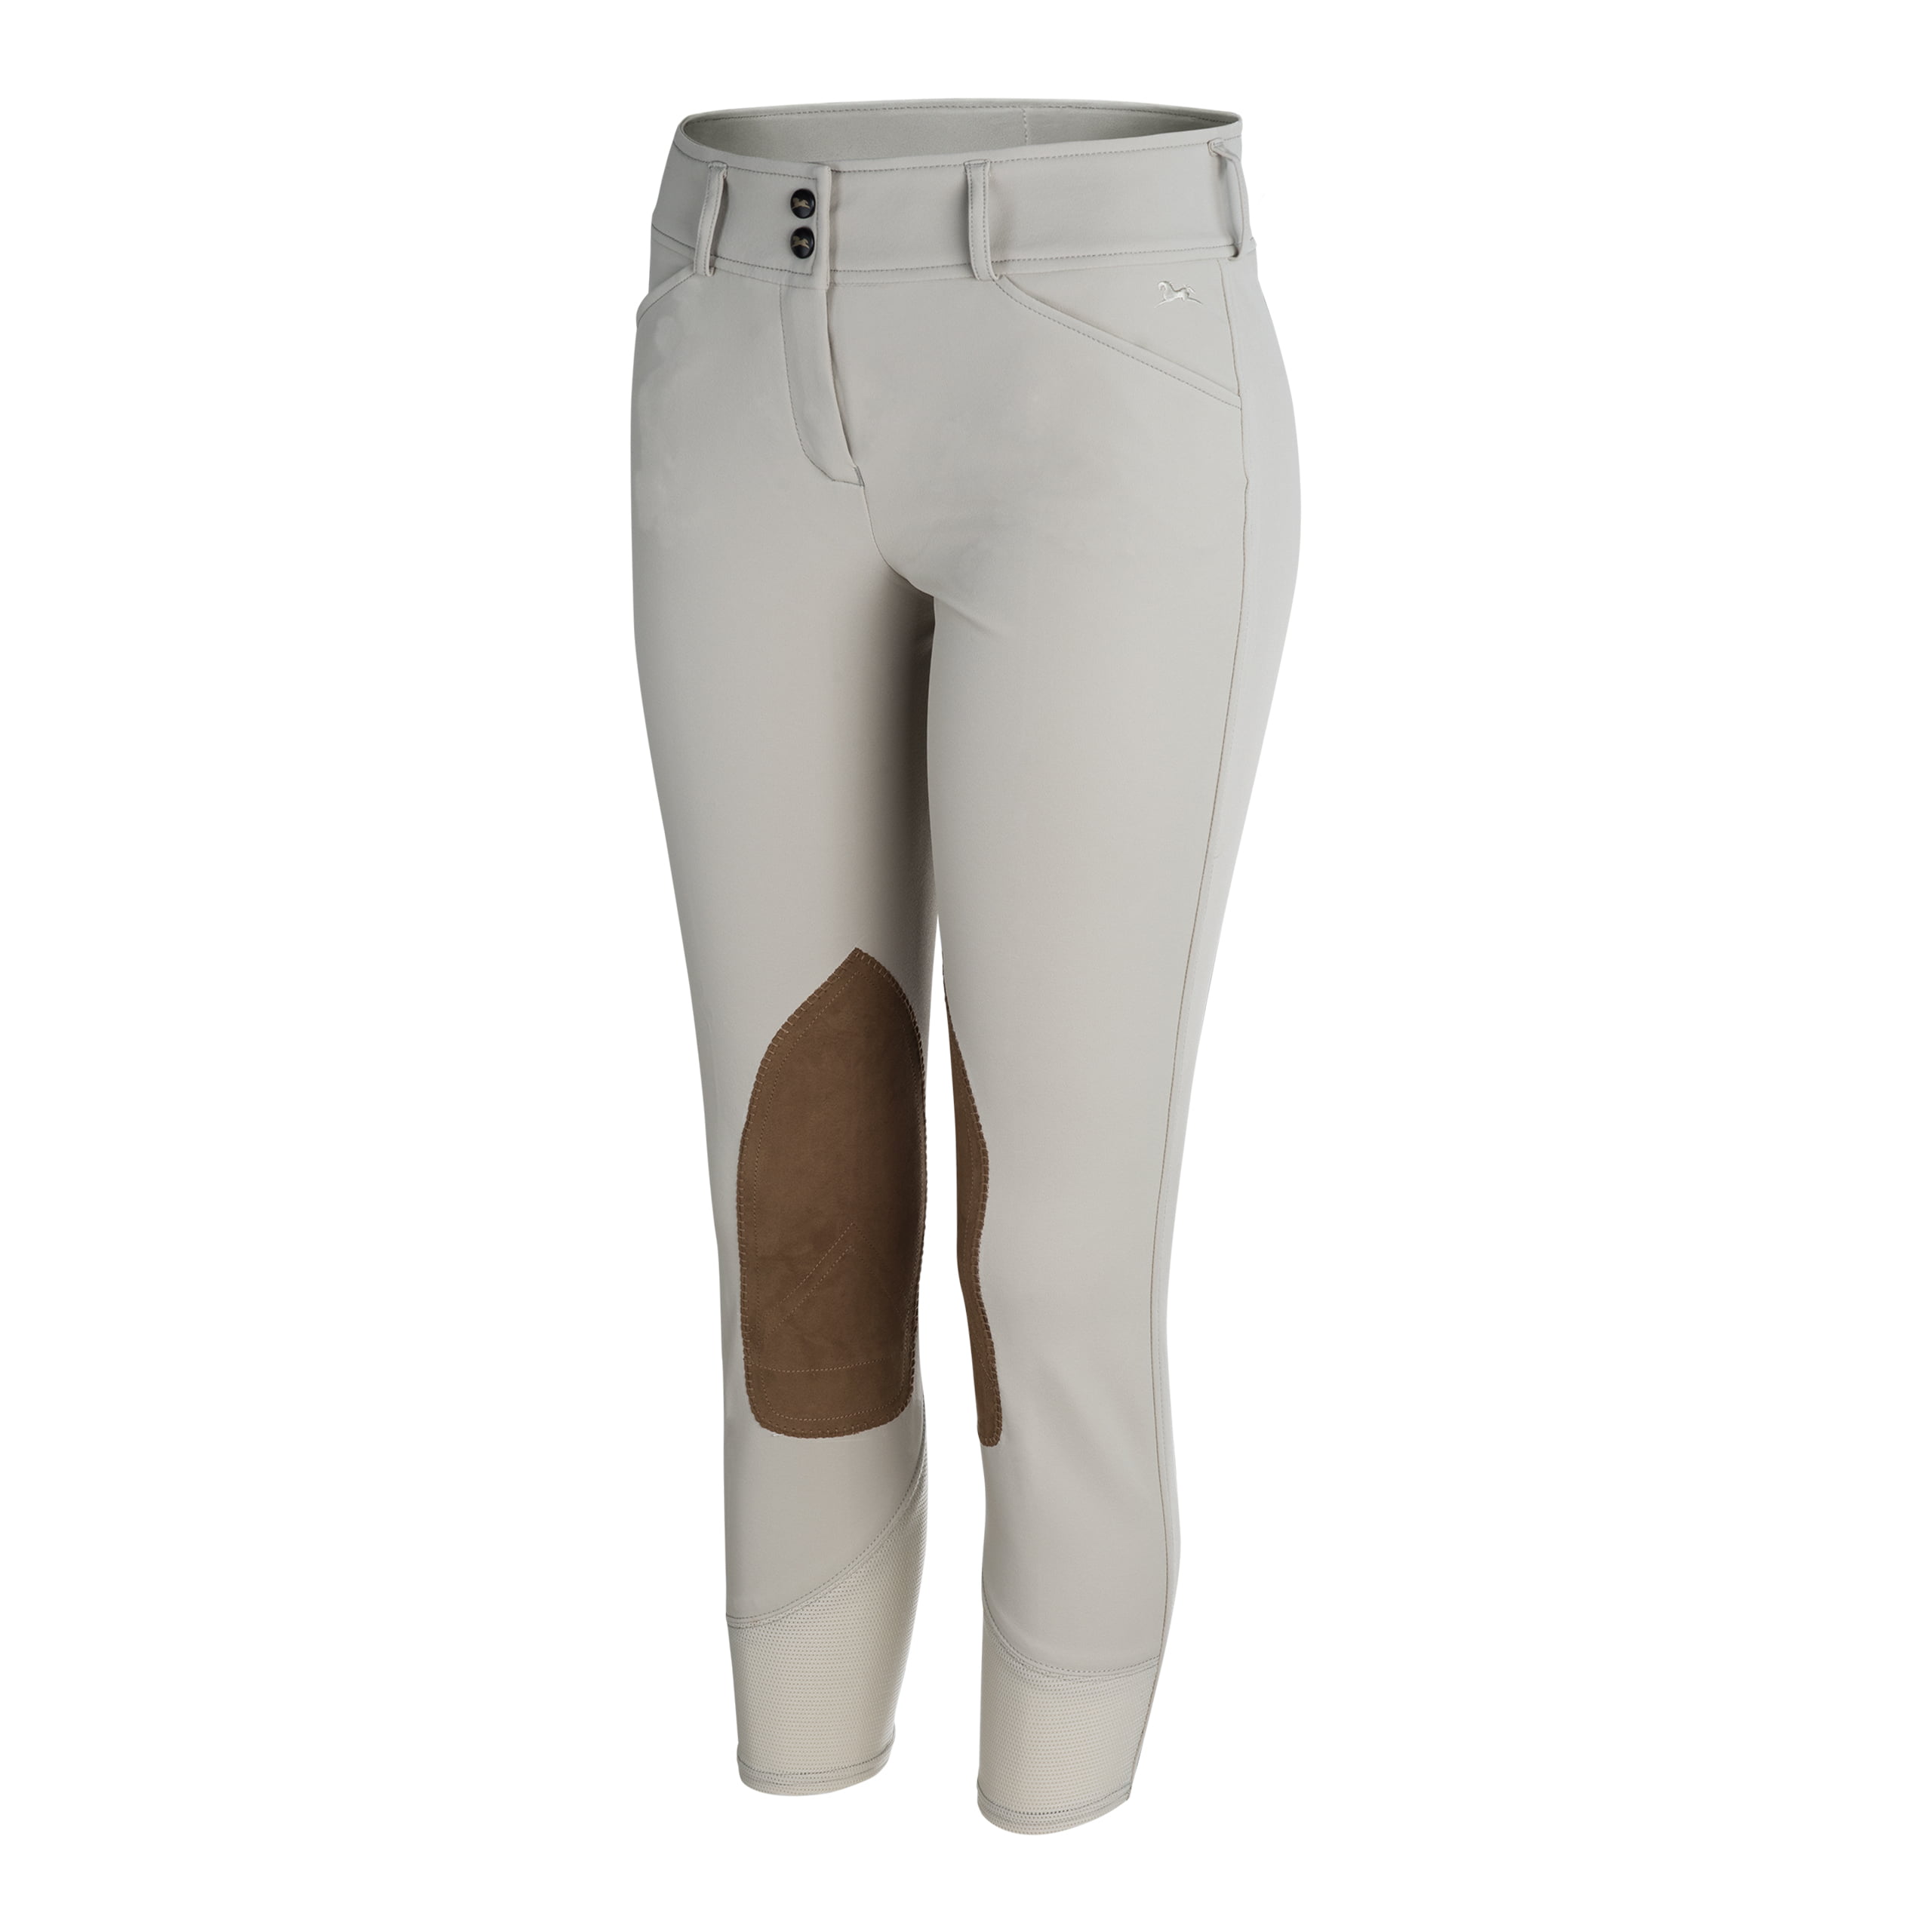 Horka Santorin Ladies Silicone Knee Patch Horse Riding Country Stylish Breeches 